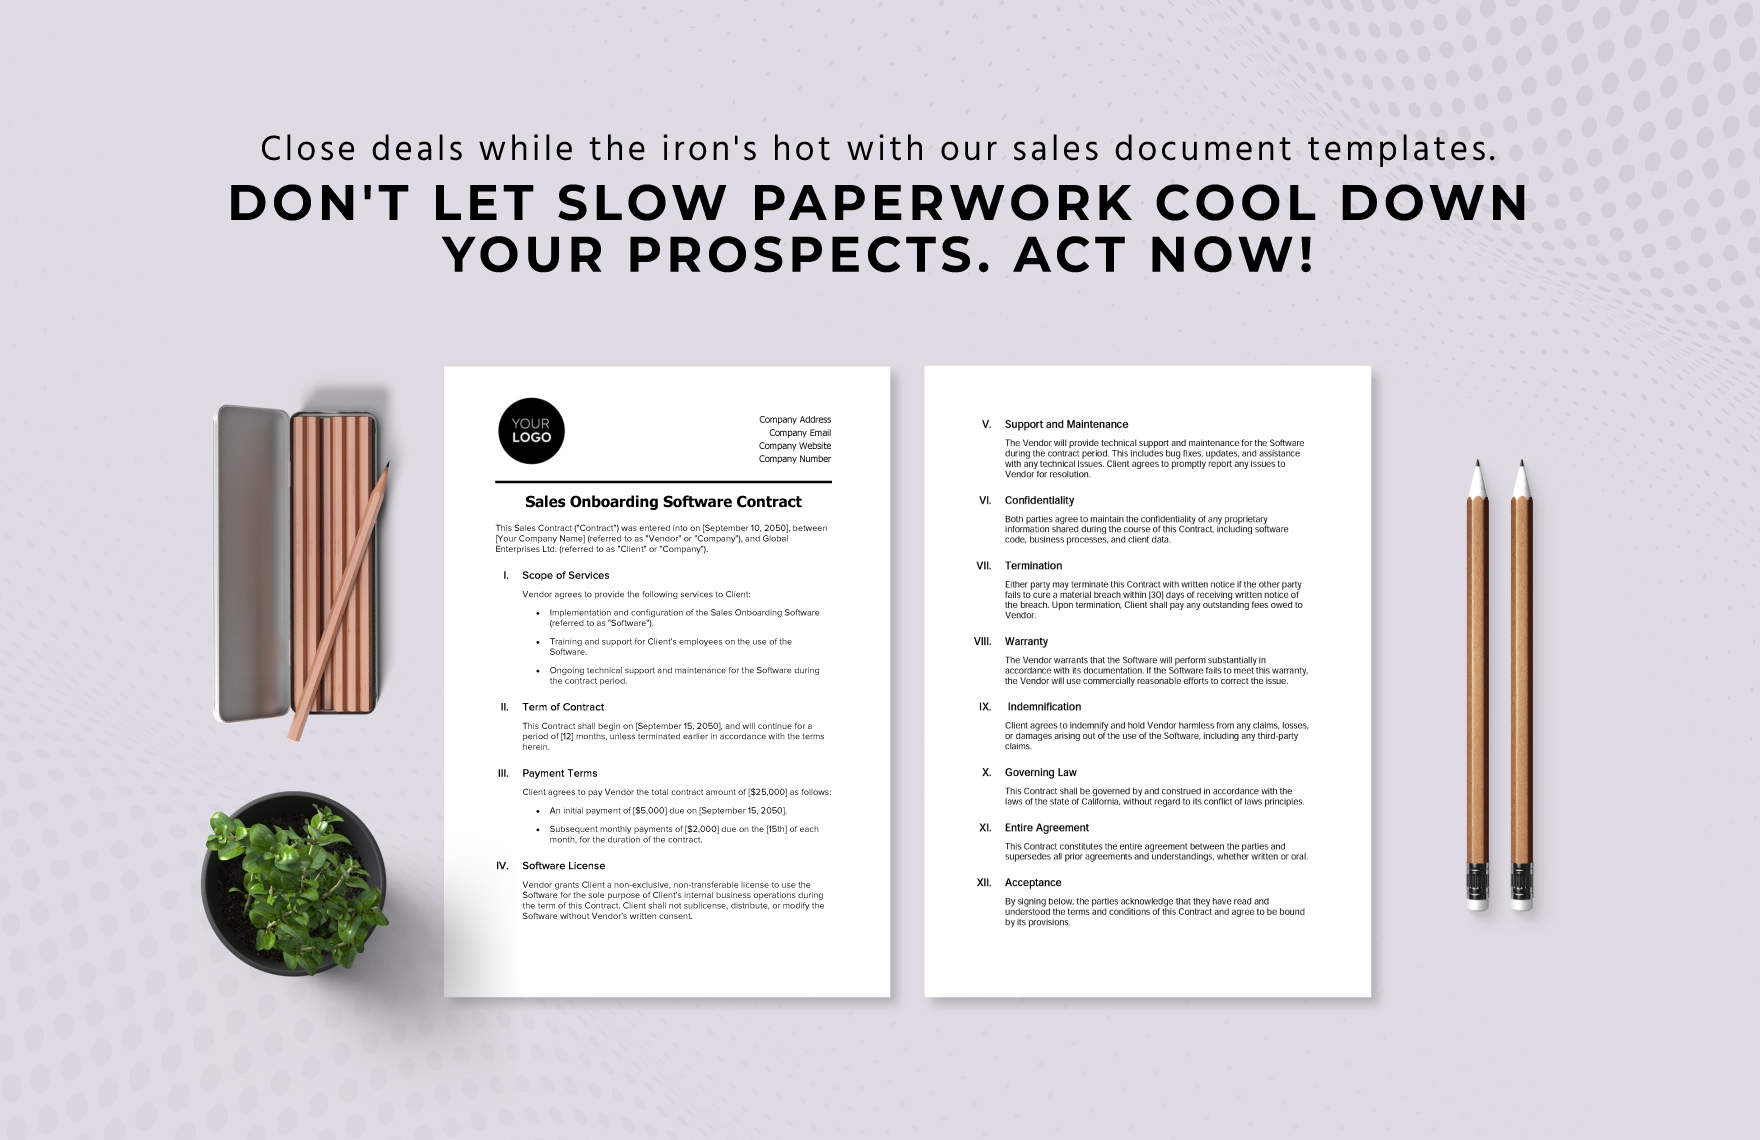 Sales Onboarding Software Contract Template